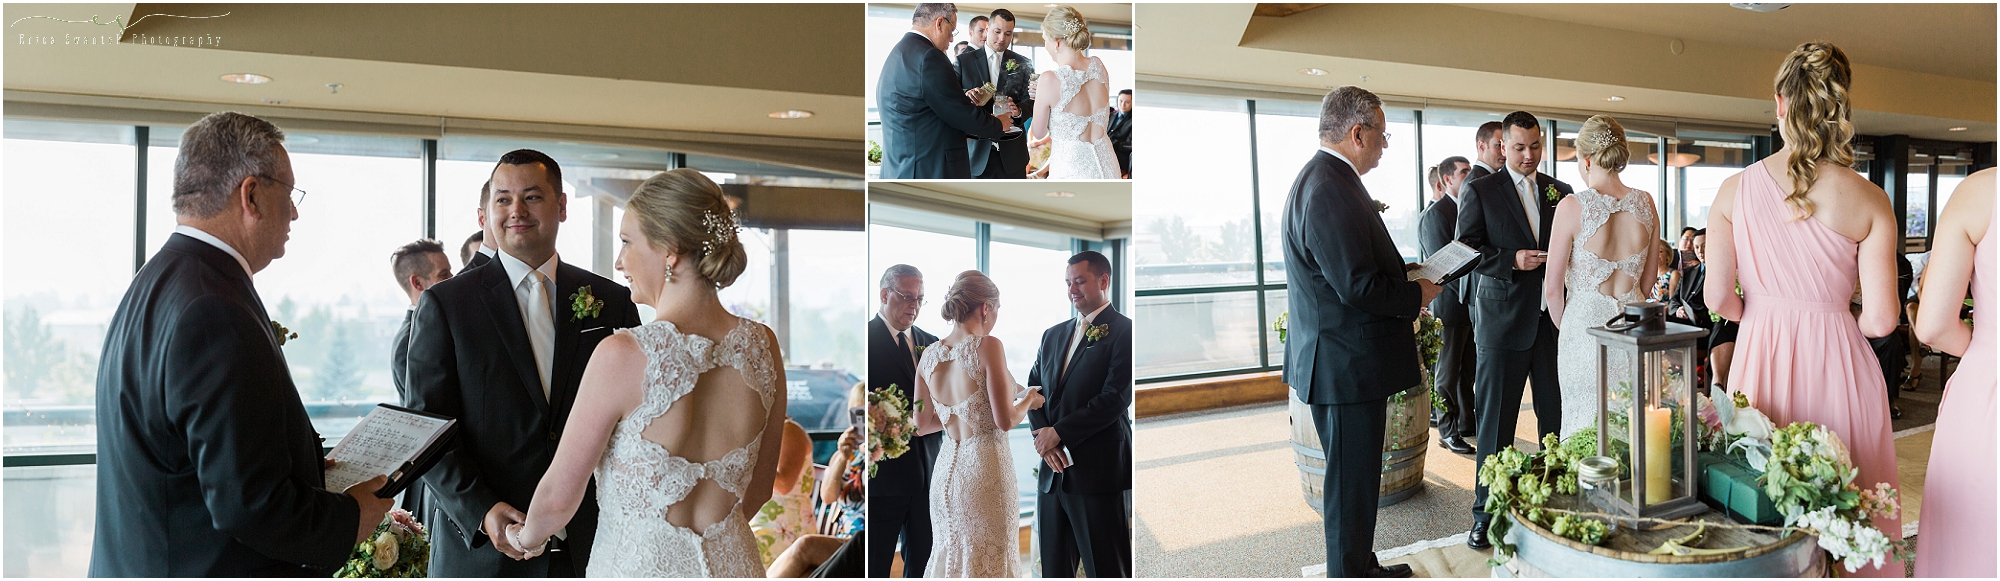 Deschutes Brewery Wedding ceremony indoors of the Mountain Room. | Erica Swantek Photography